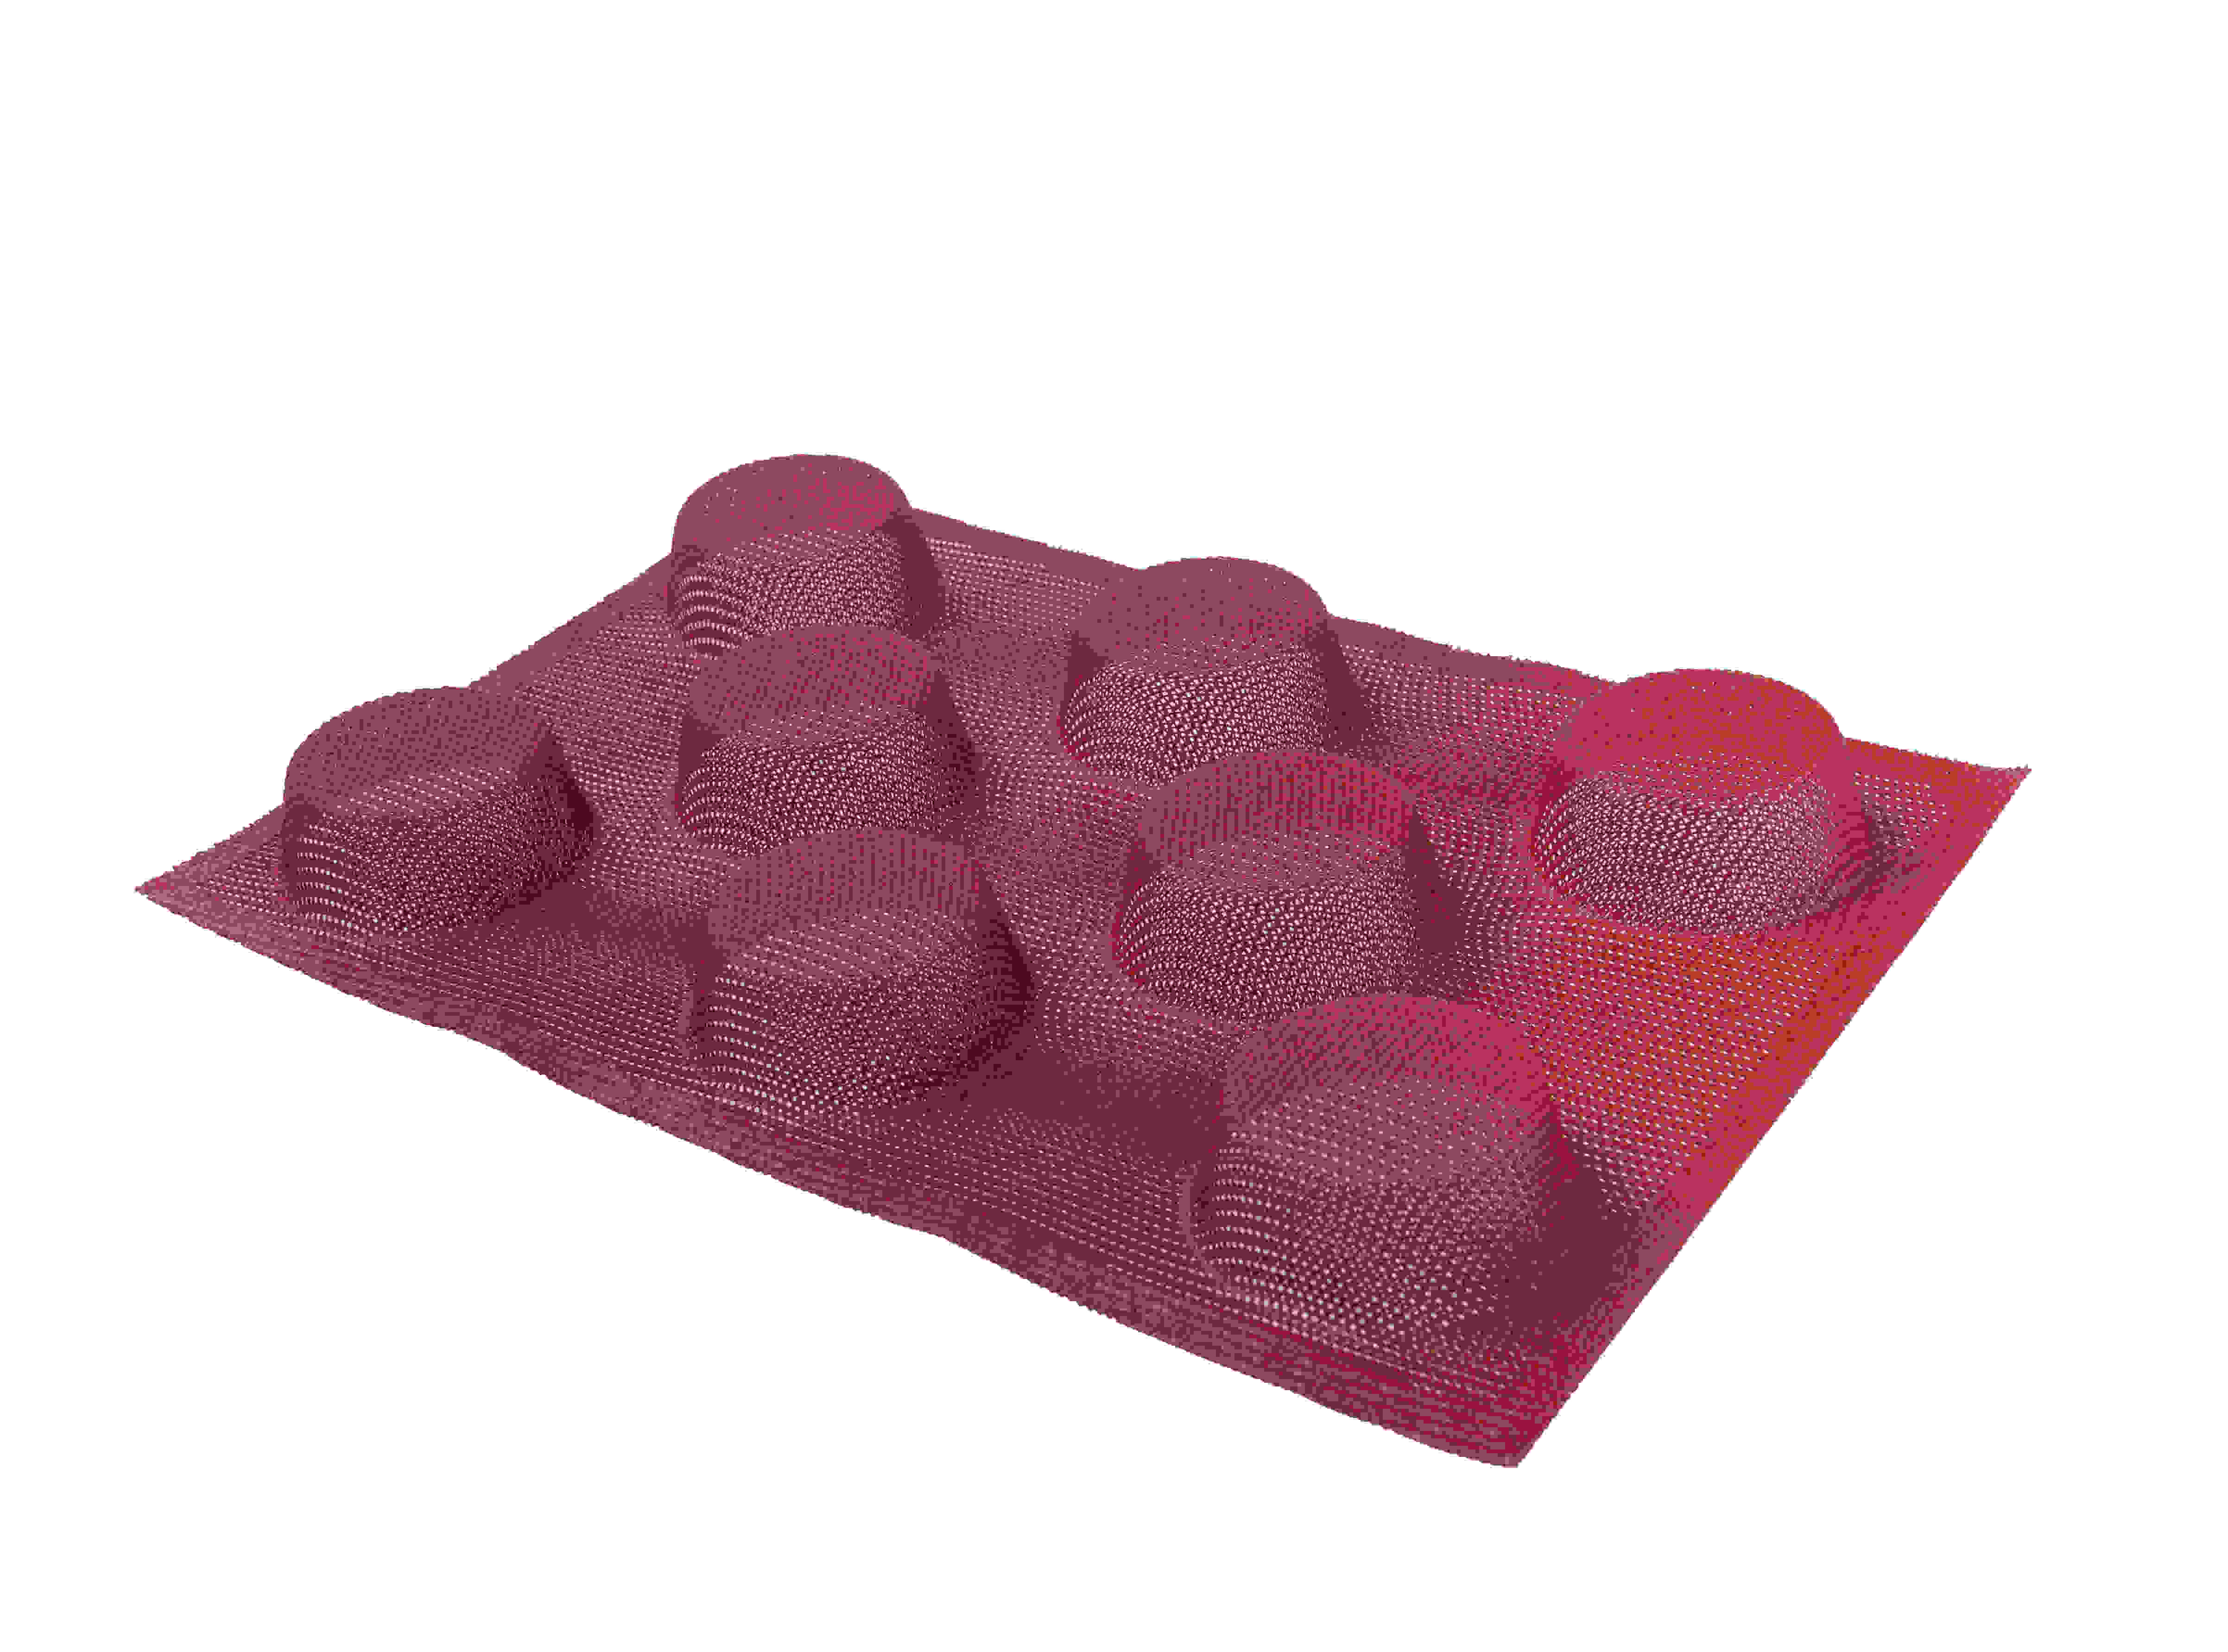 Non Stick Silicone Baking Molds Perforated Bun Bread Forms Round Shapes